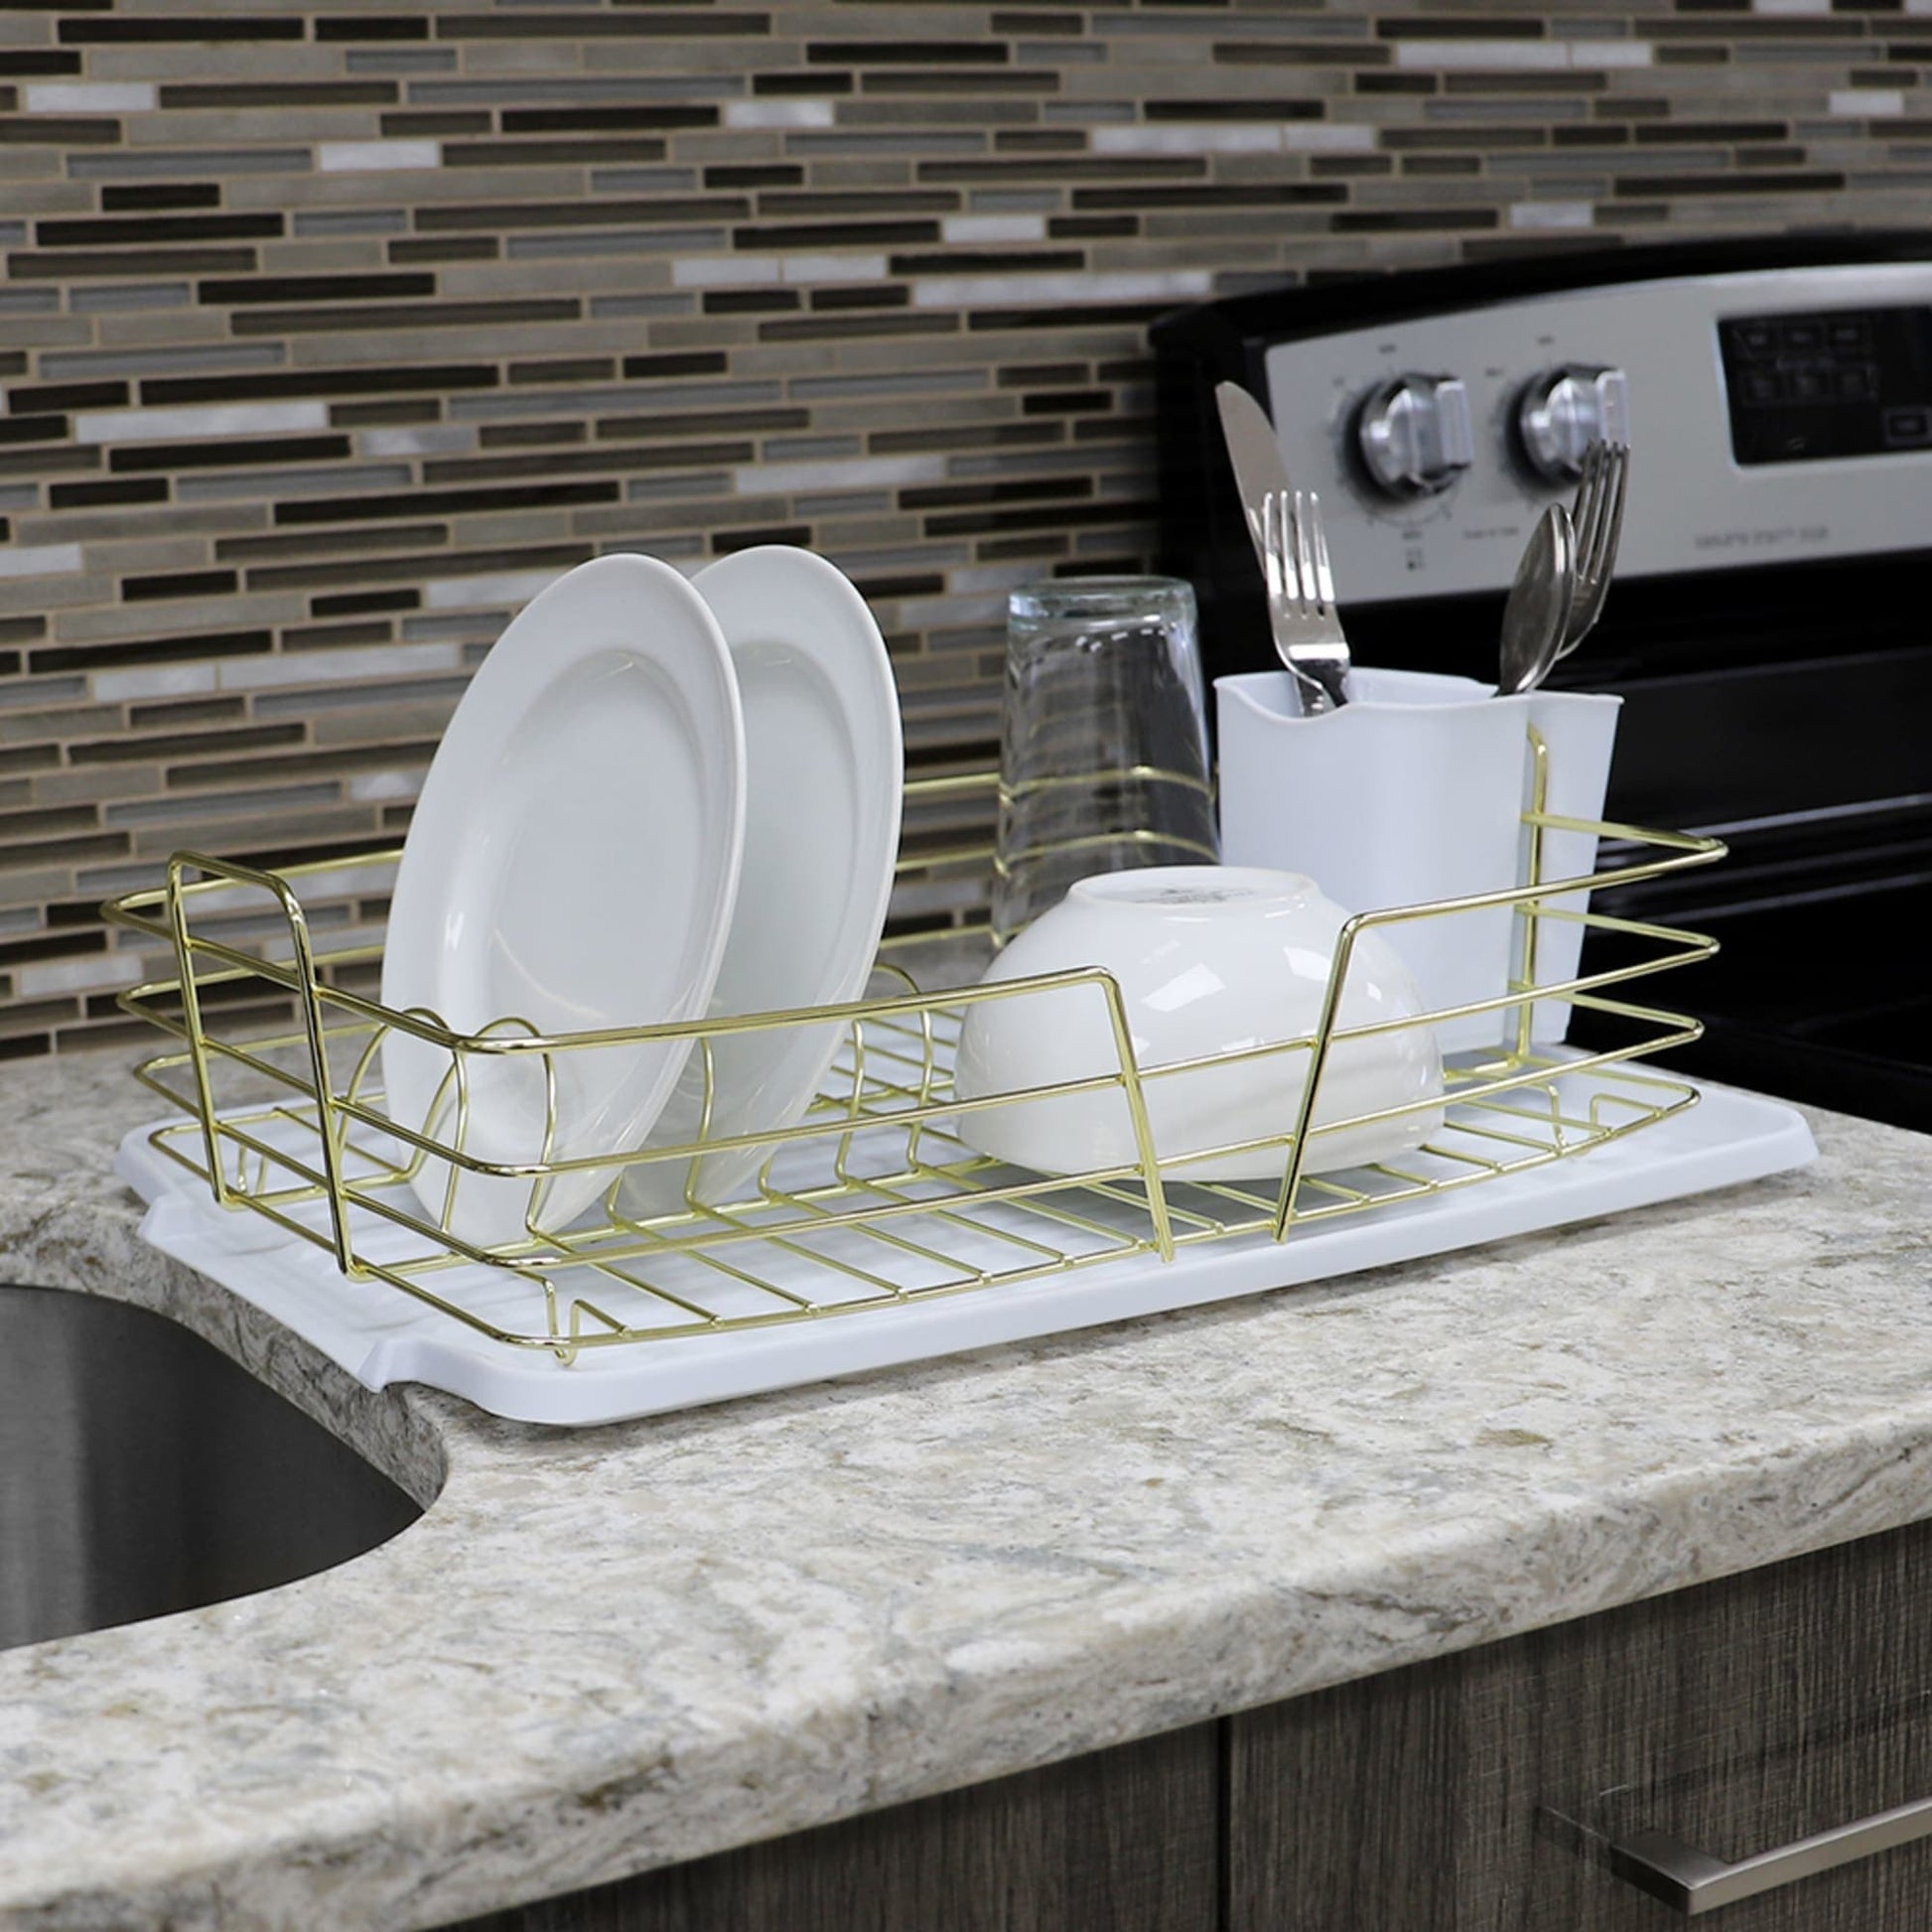 Kitchen Details Over the Sink Drying Rack with Utensil Holder